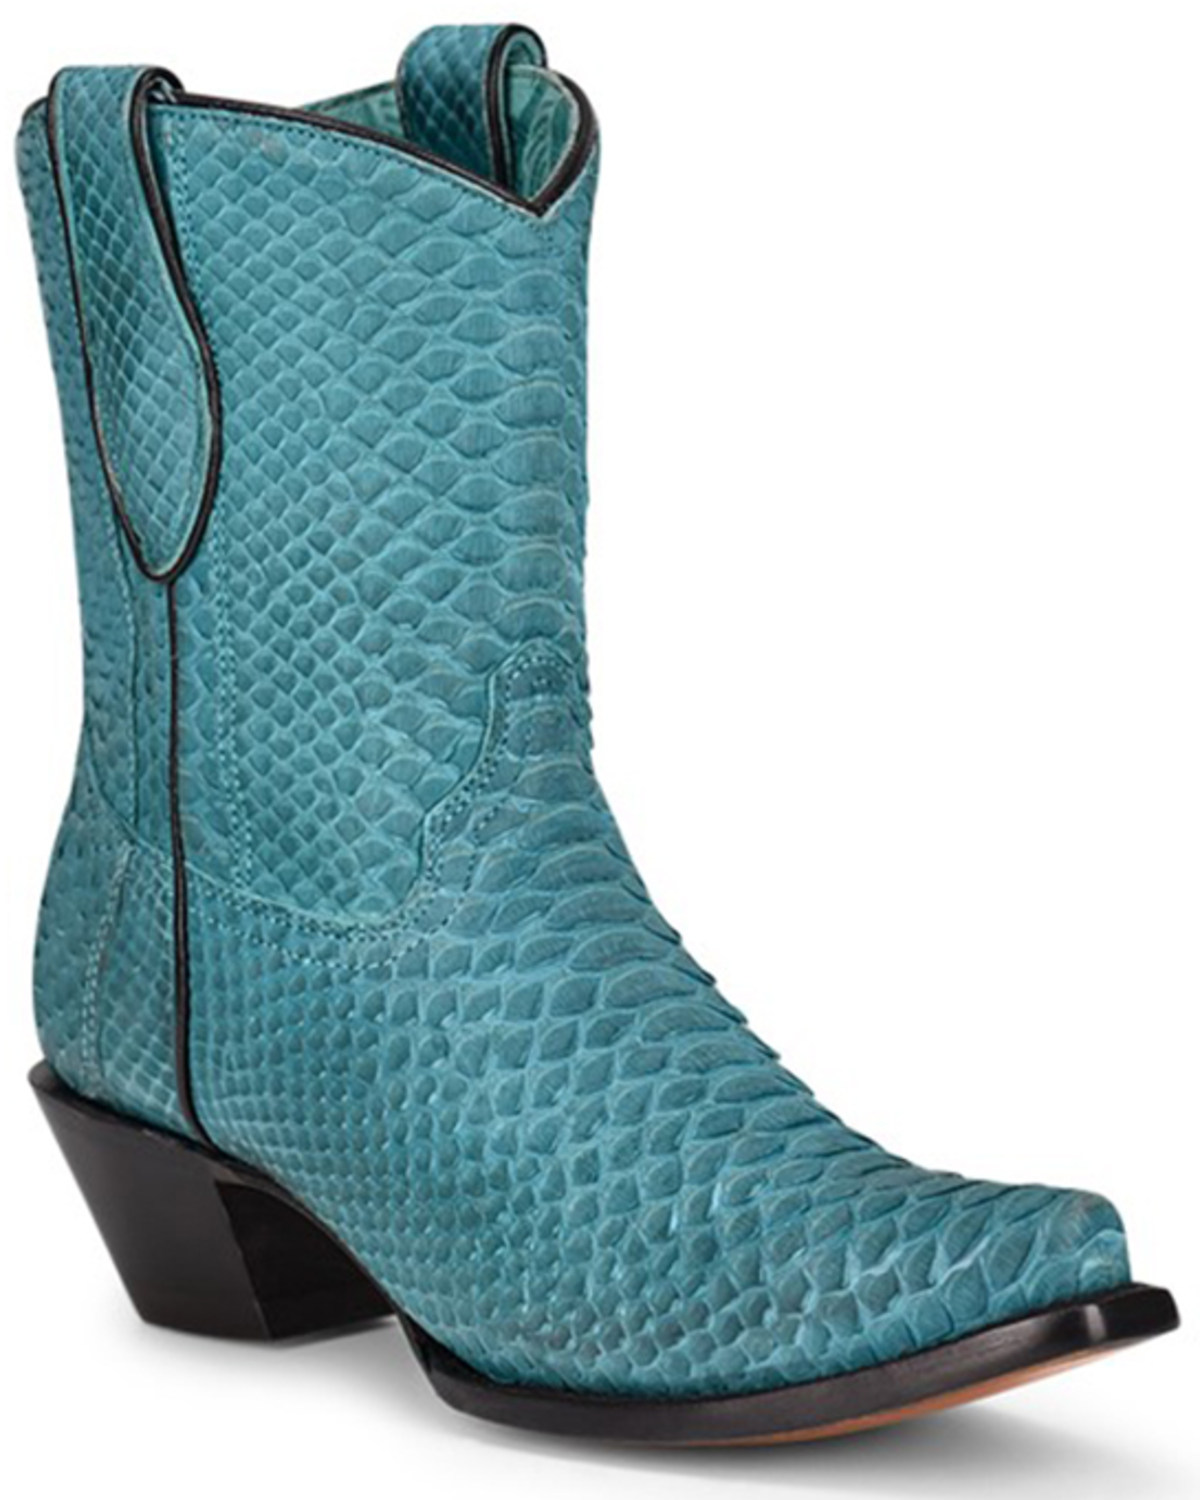 Corral Women's Turquoise Exotic Python Skin Western Boots - Snip Toe